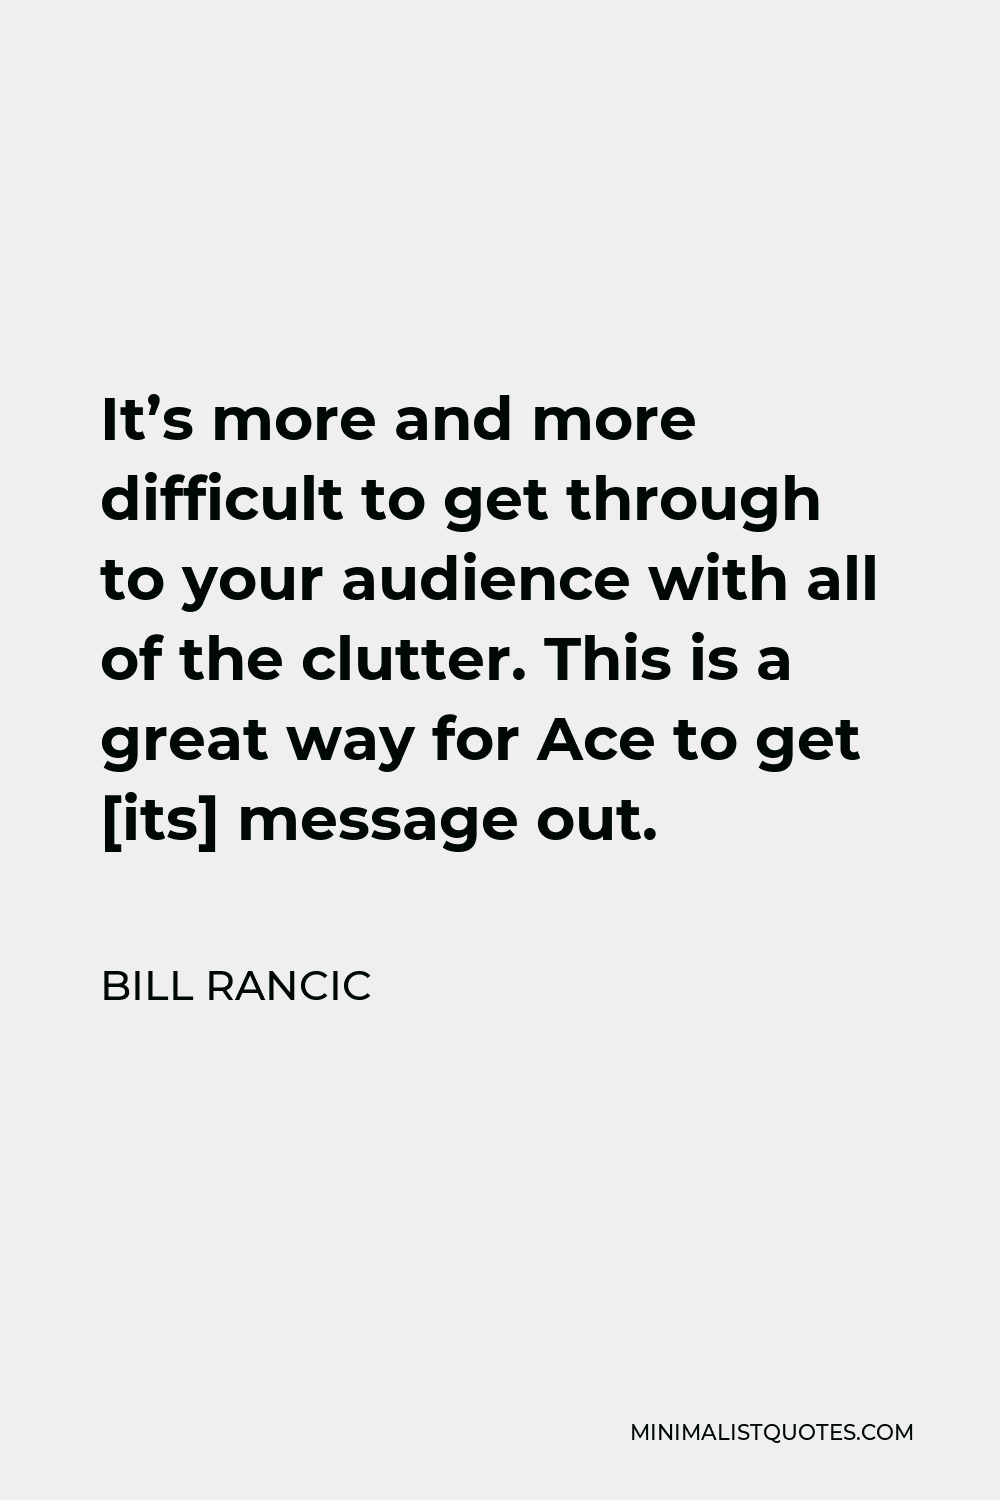 Bill Rancic Quote - It’s more and more difficult to get through to your audience with all of the clutter. This is a great way for Ace to get [its] message out.